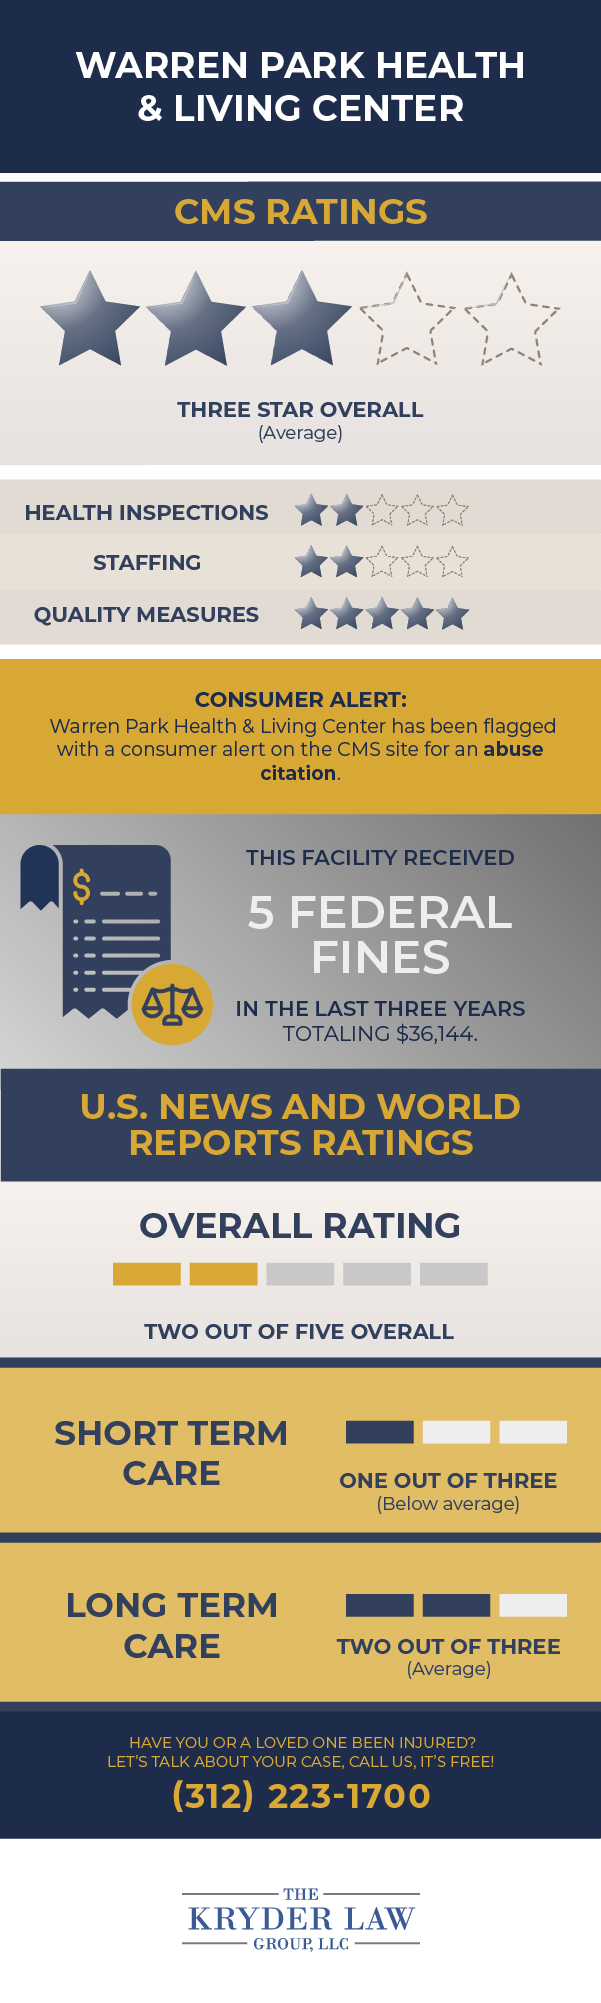 Warren Park Health and Living Center CMS Ratings and U.S. News and World Reports Ratings